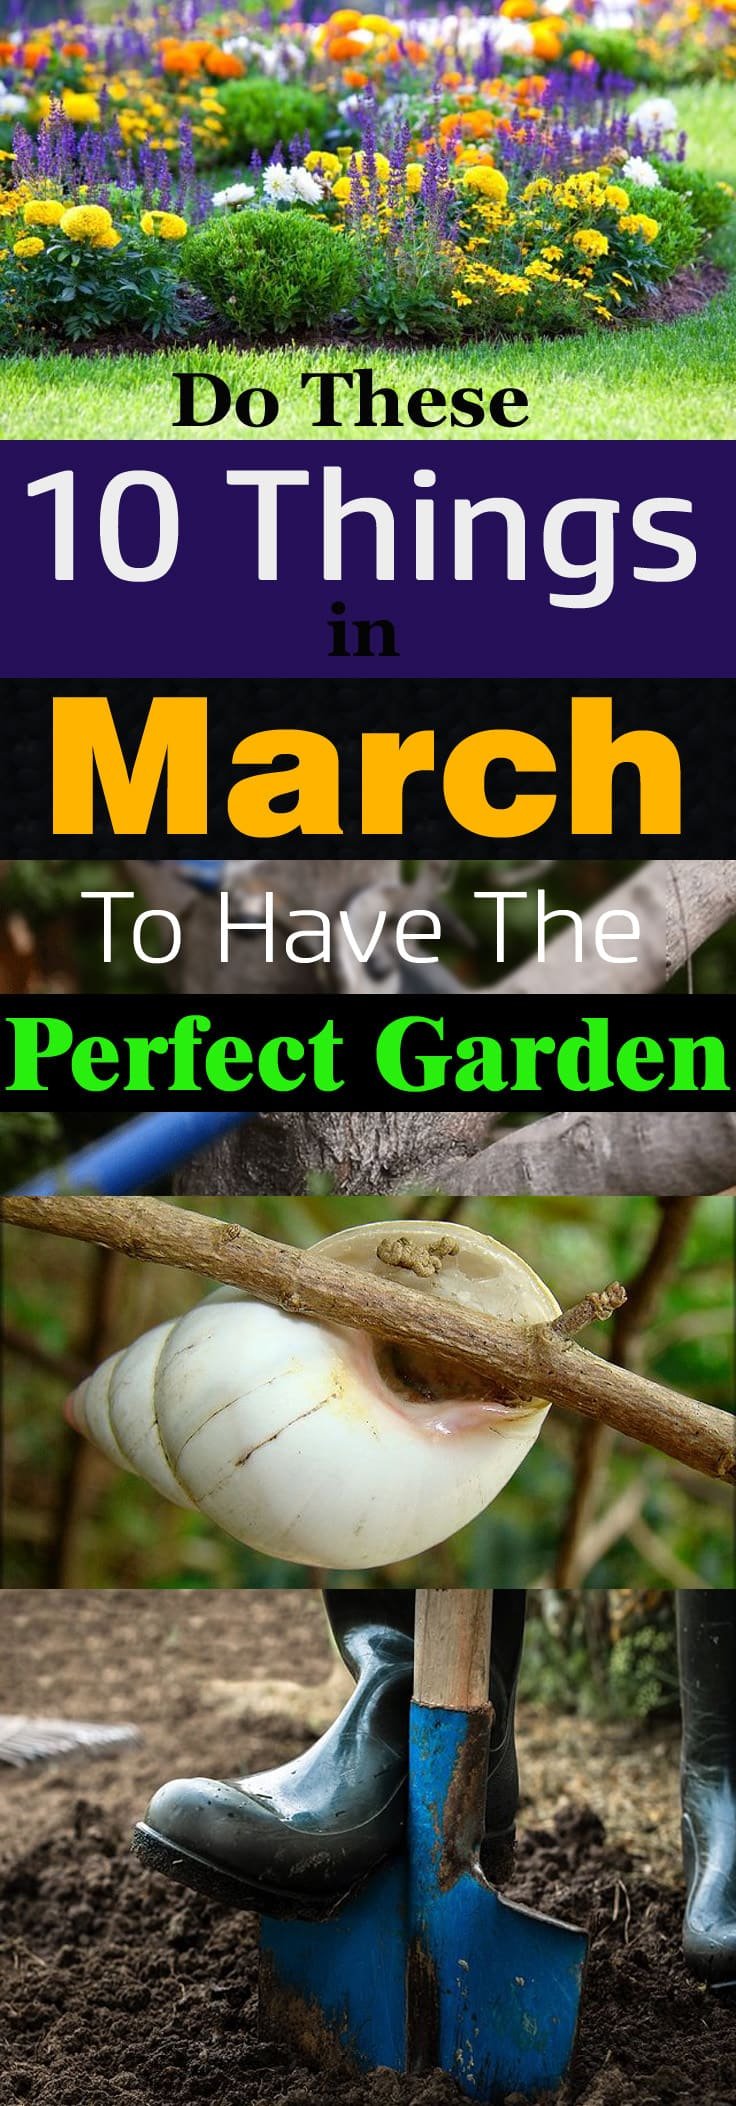 See the checklist of 10 important things you can do in March in the garden as the spring is about to come and gardening season is beginning!